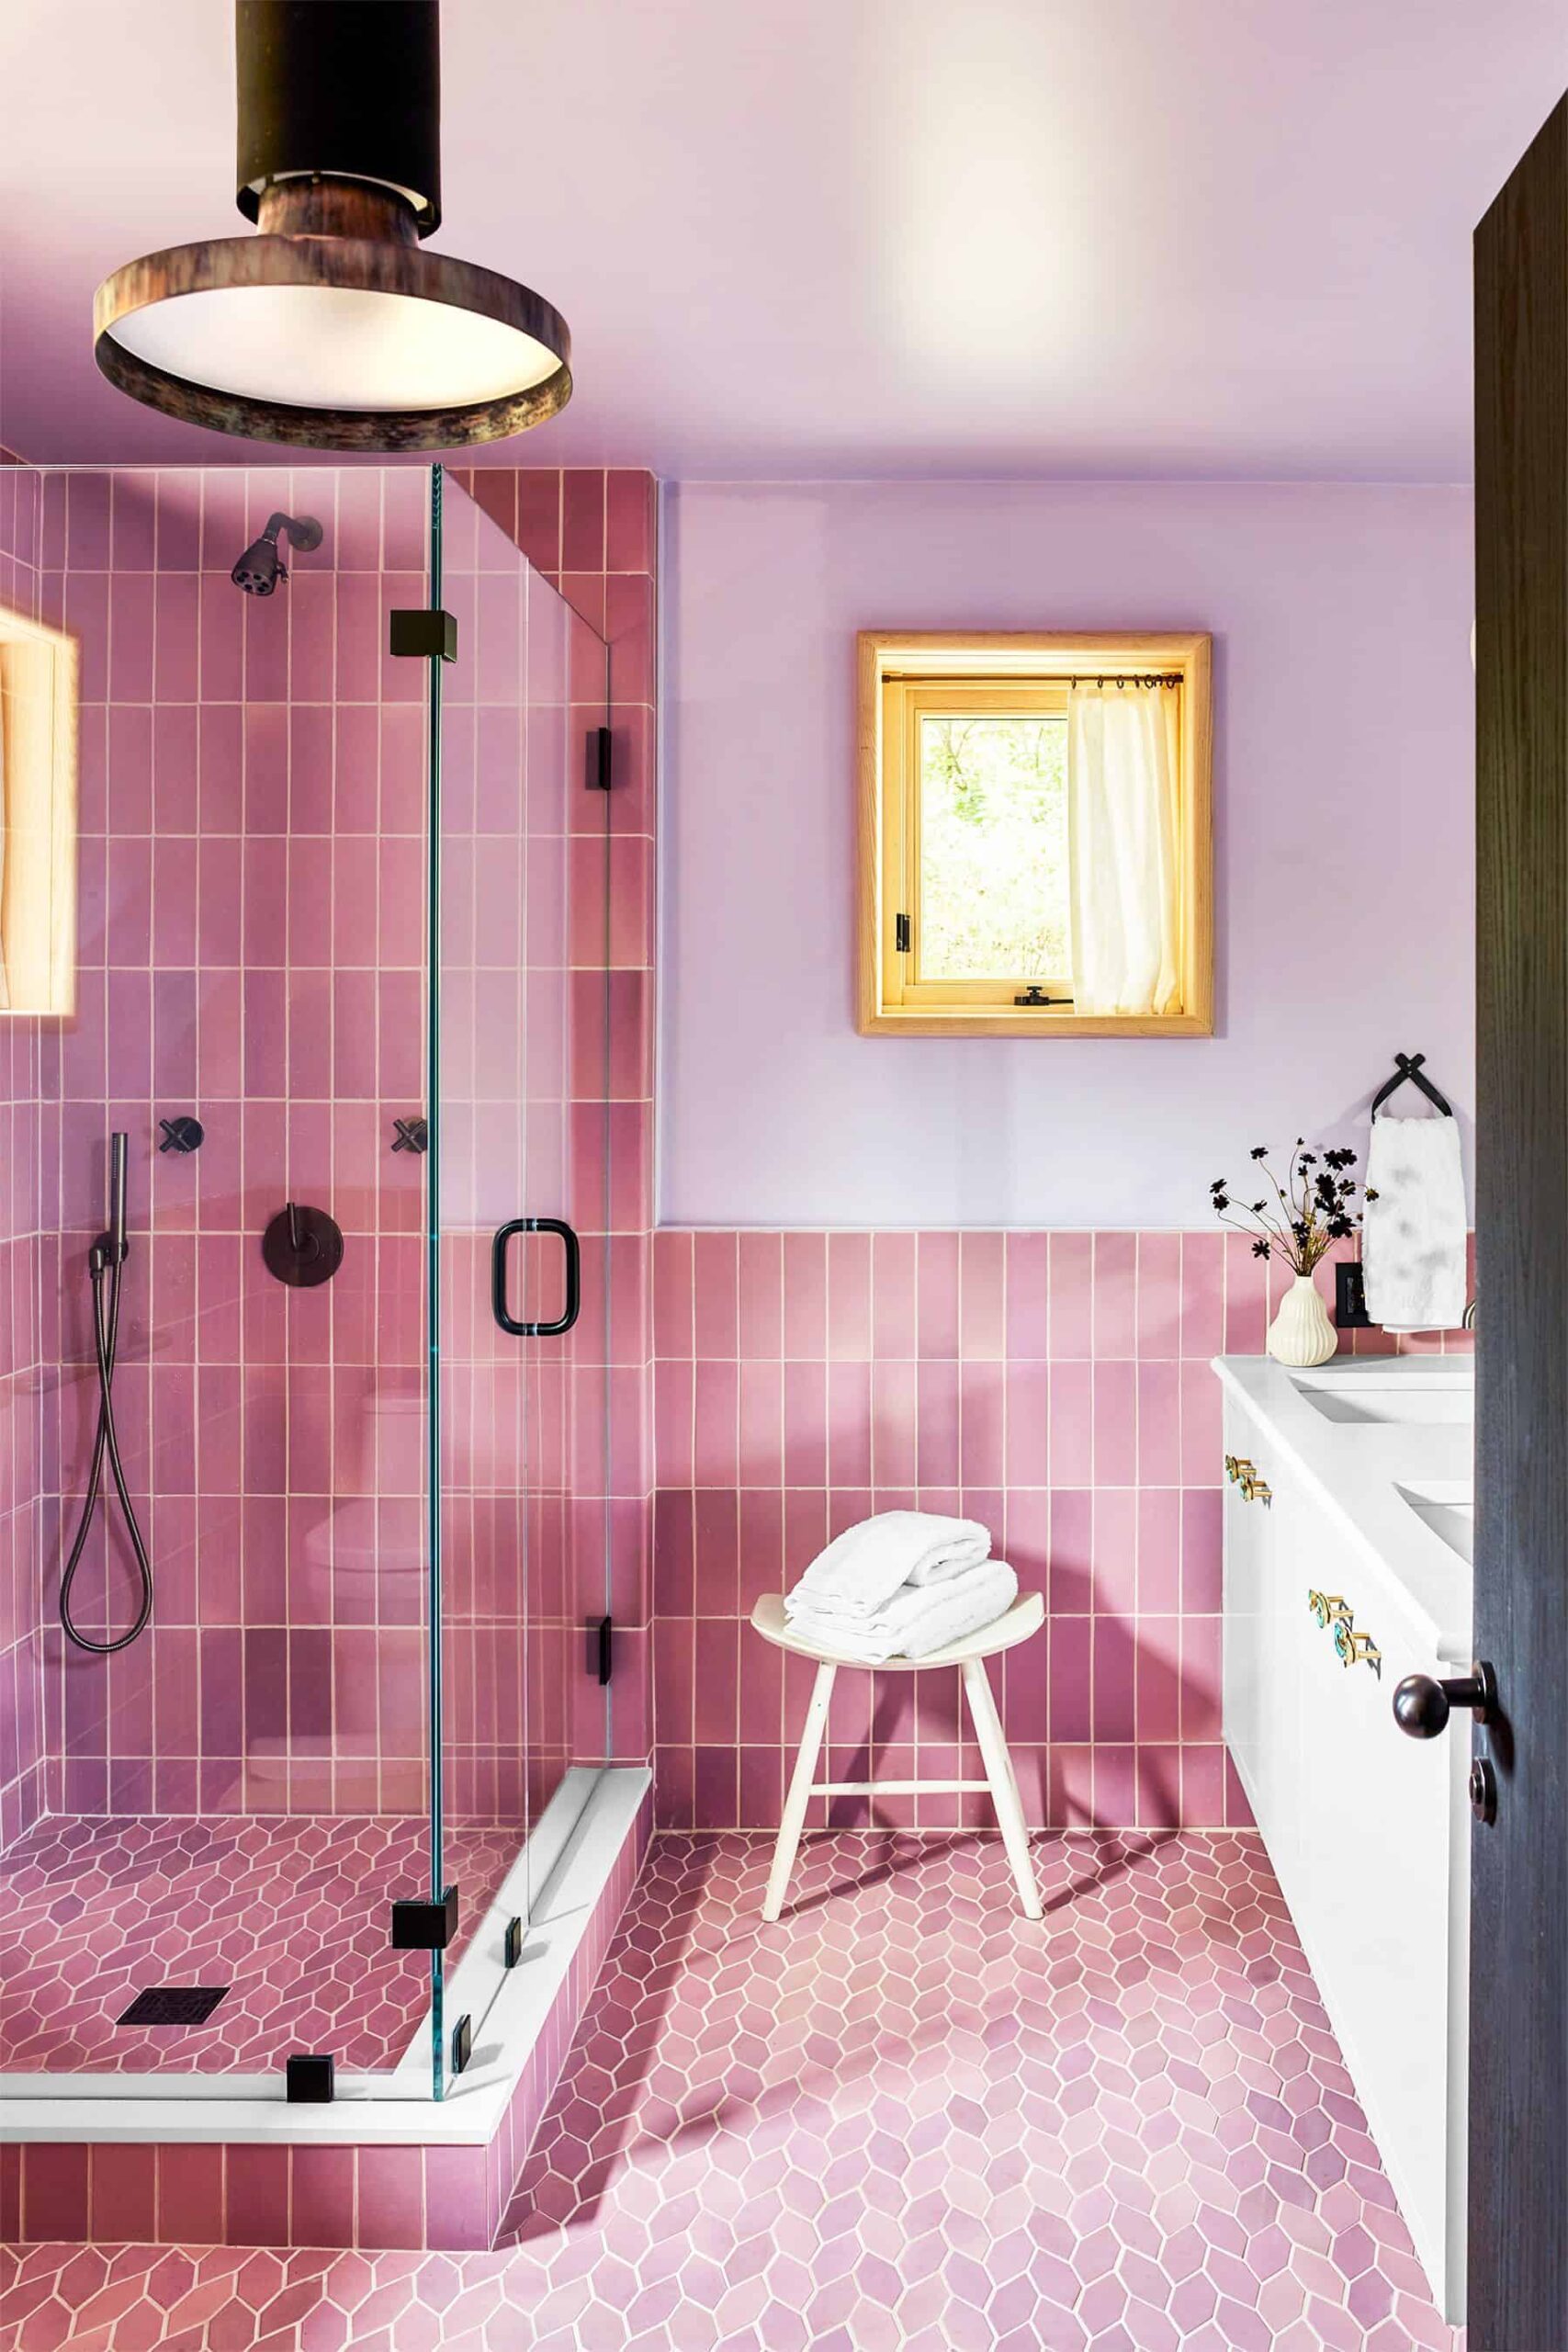 A light pink bathroom design with lights, chair and more